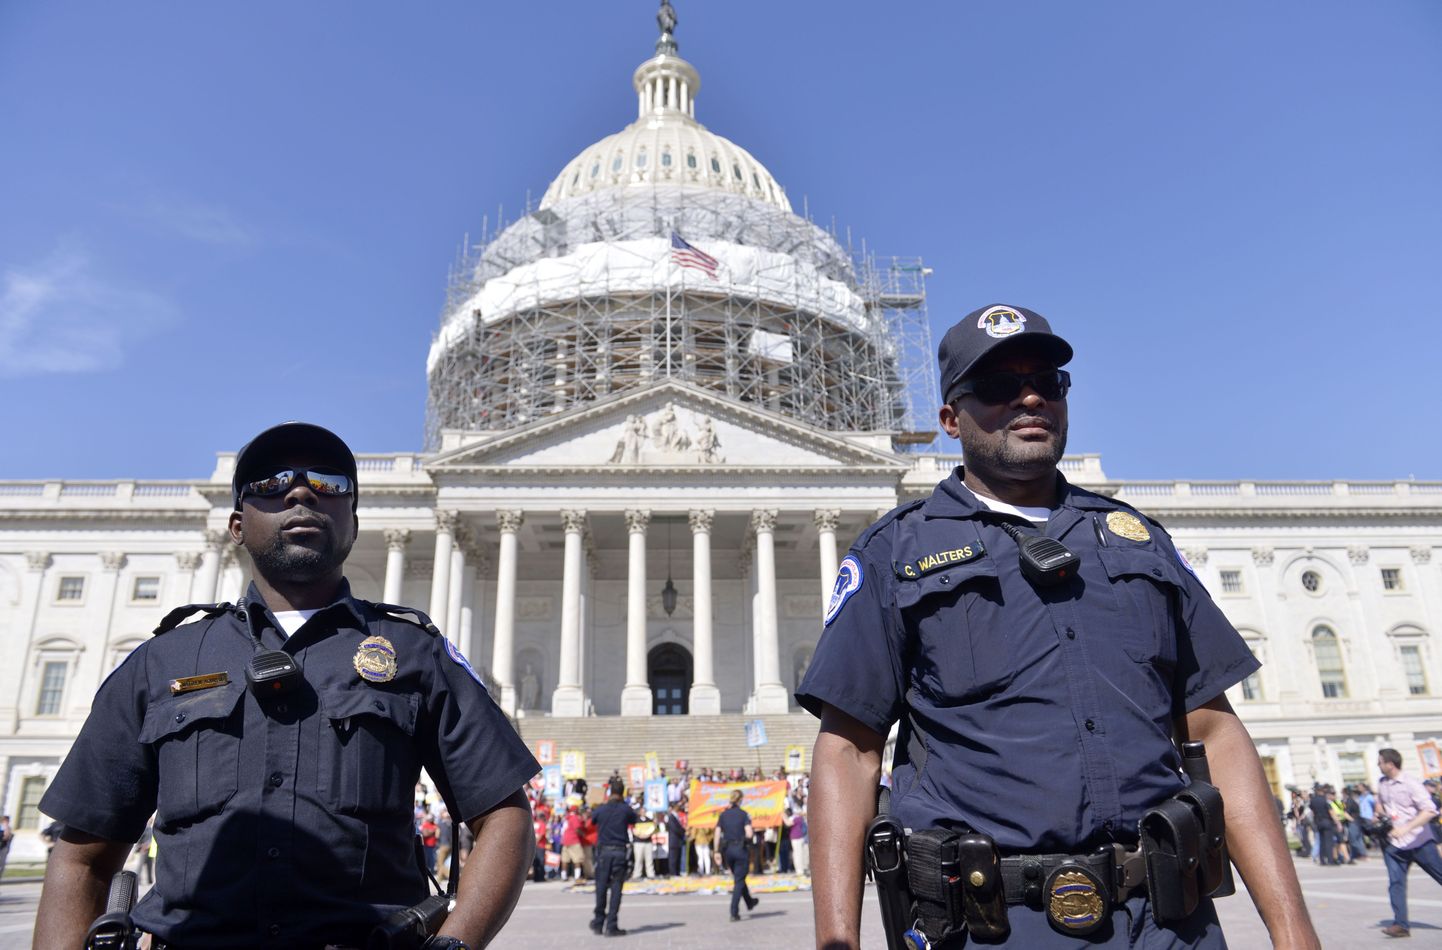 (160418) -- WASHINGTON D.C., April 18, 2016 (Xinhua) -- U.S. Capitol Police surround protestors who volunteer to be arrested during a demonstration against Money Politics on Capitol Hill in Washington D.C., the United States, on April 18, 2016. Few hundreds of protestors were arrested, according to demonstration organizers.(Xinhua/Yin Bogu) (Photo by Xinhua/Sipa USA)